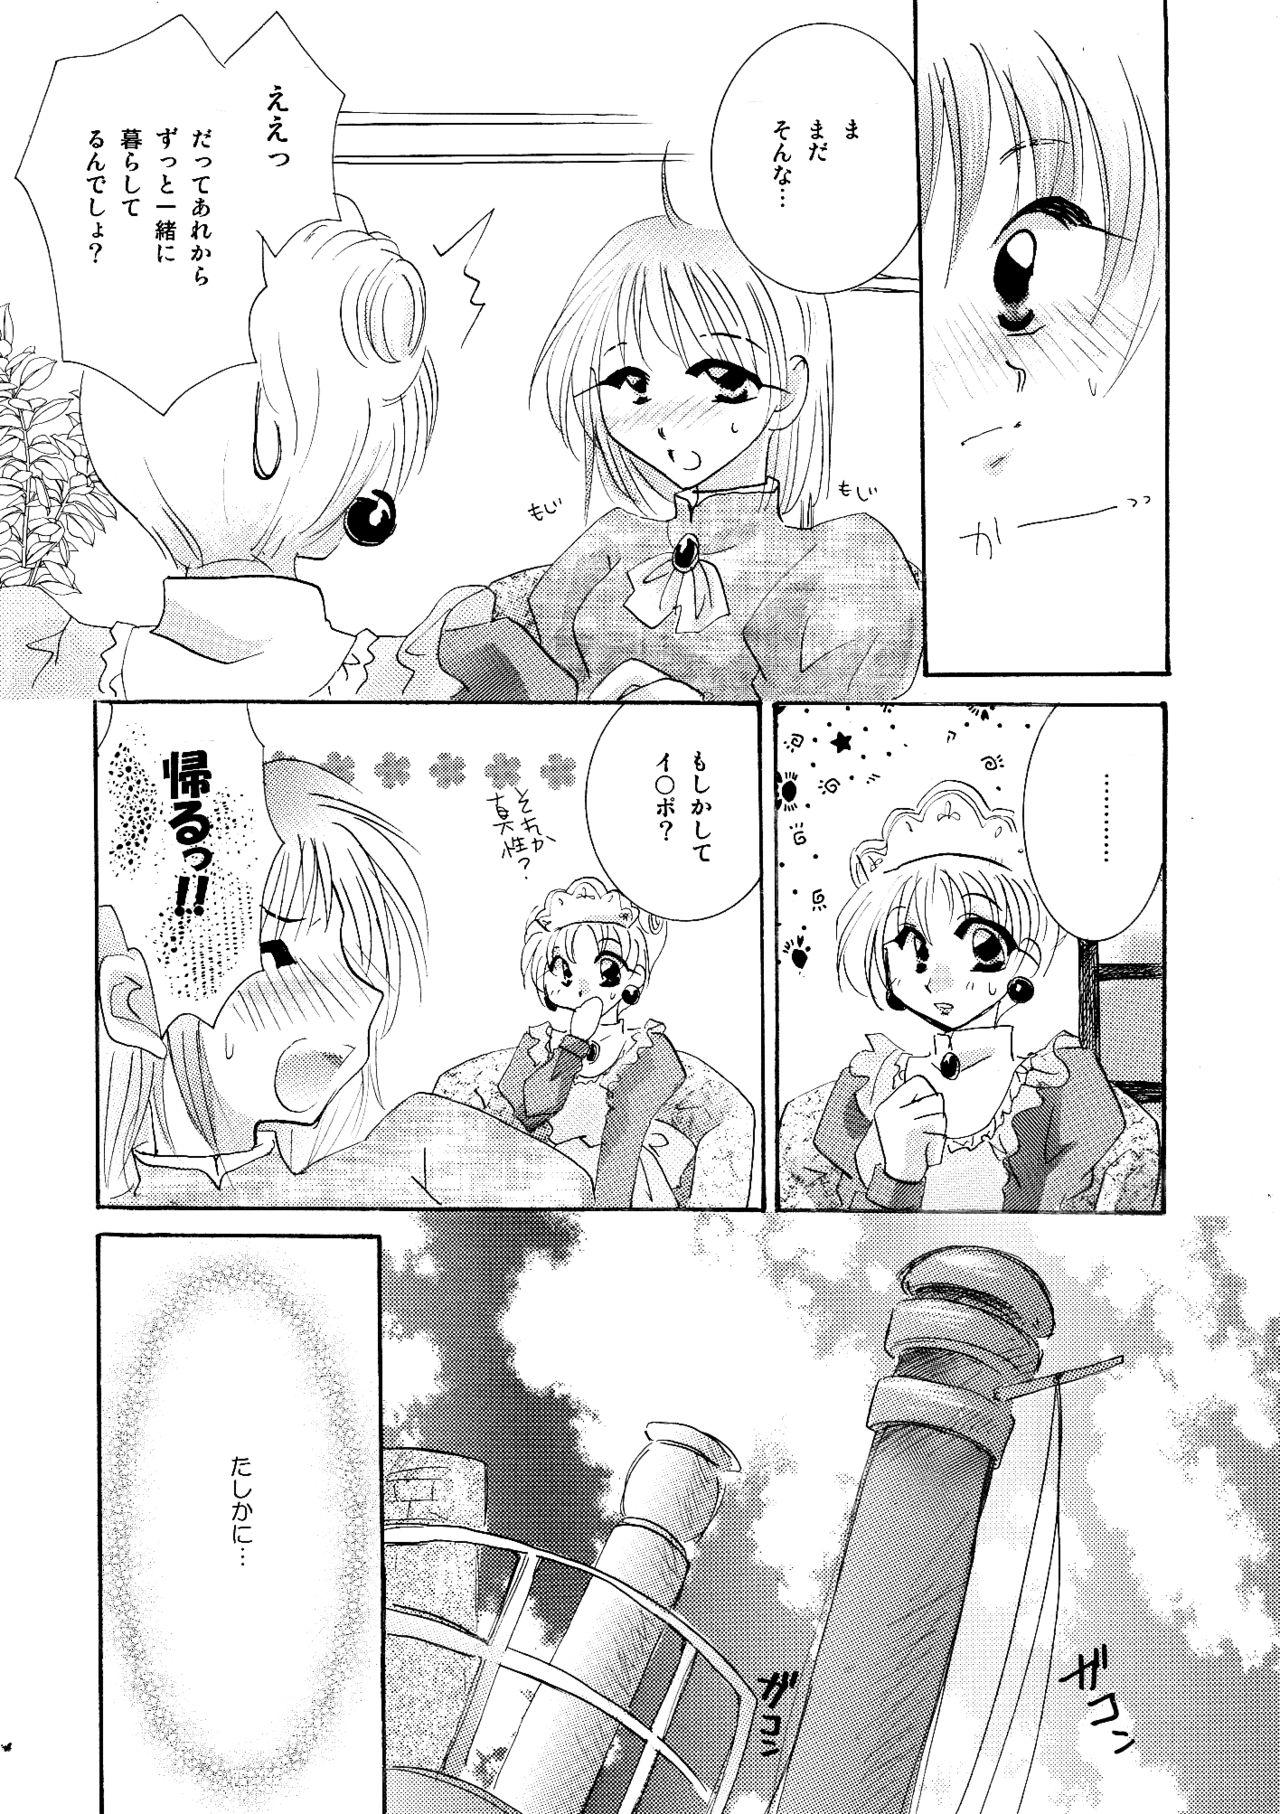 Squirting etc Movie ver. - Howls moving castle Mallu - Page 6